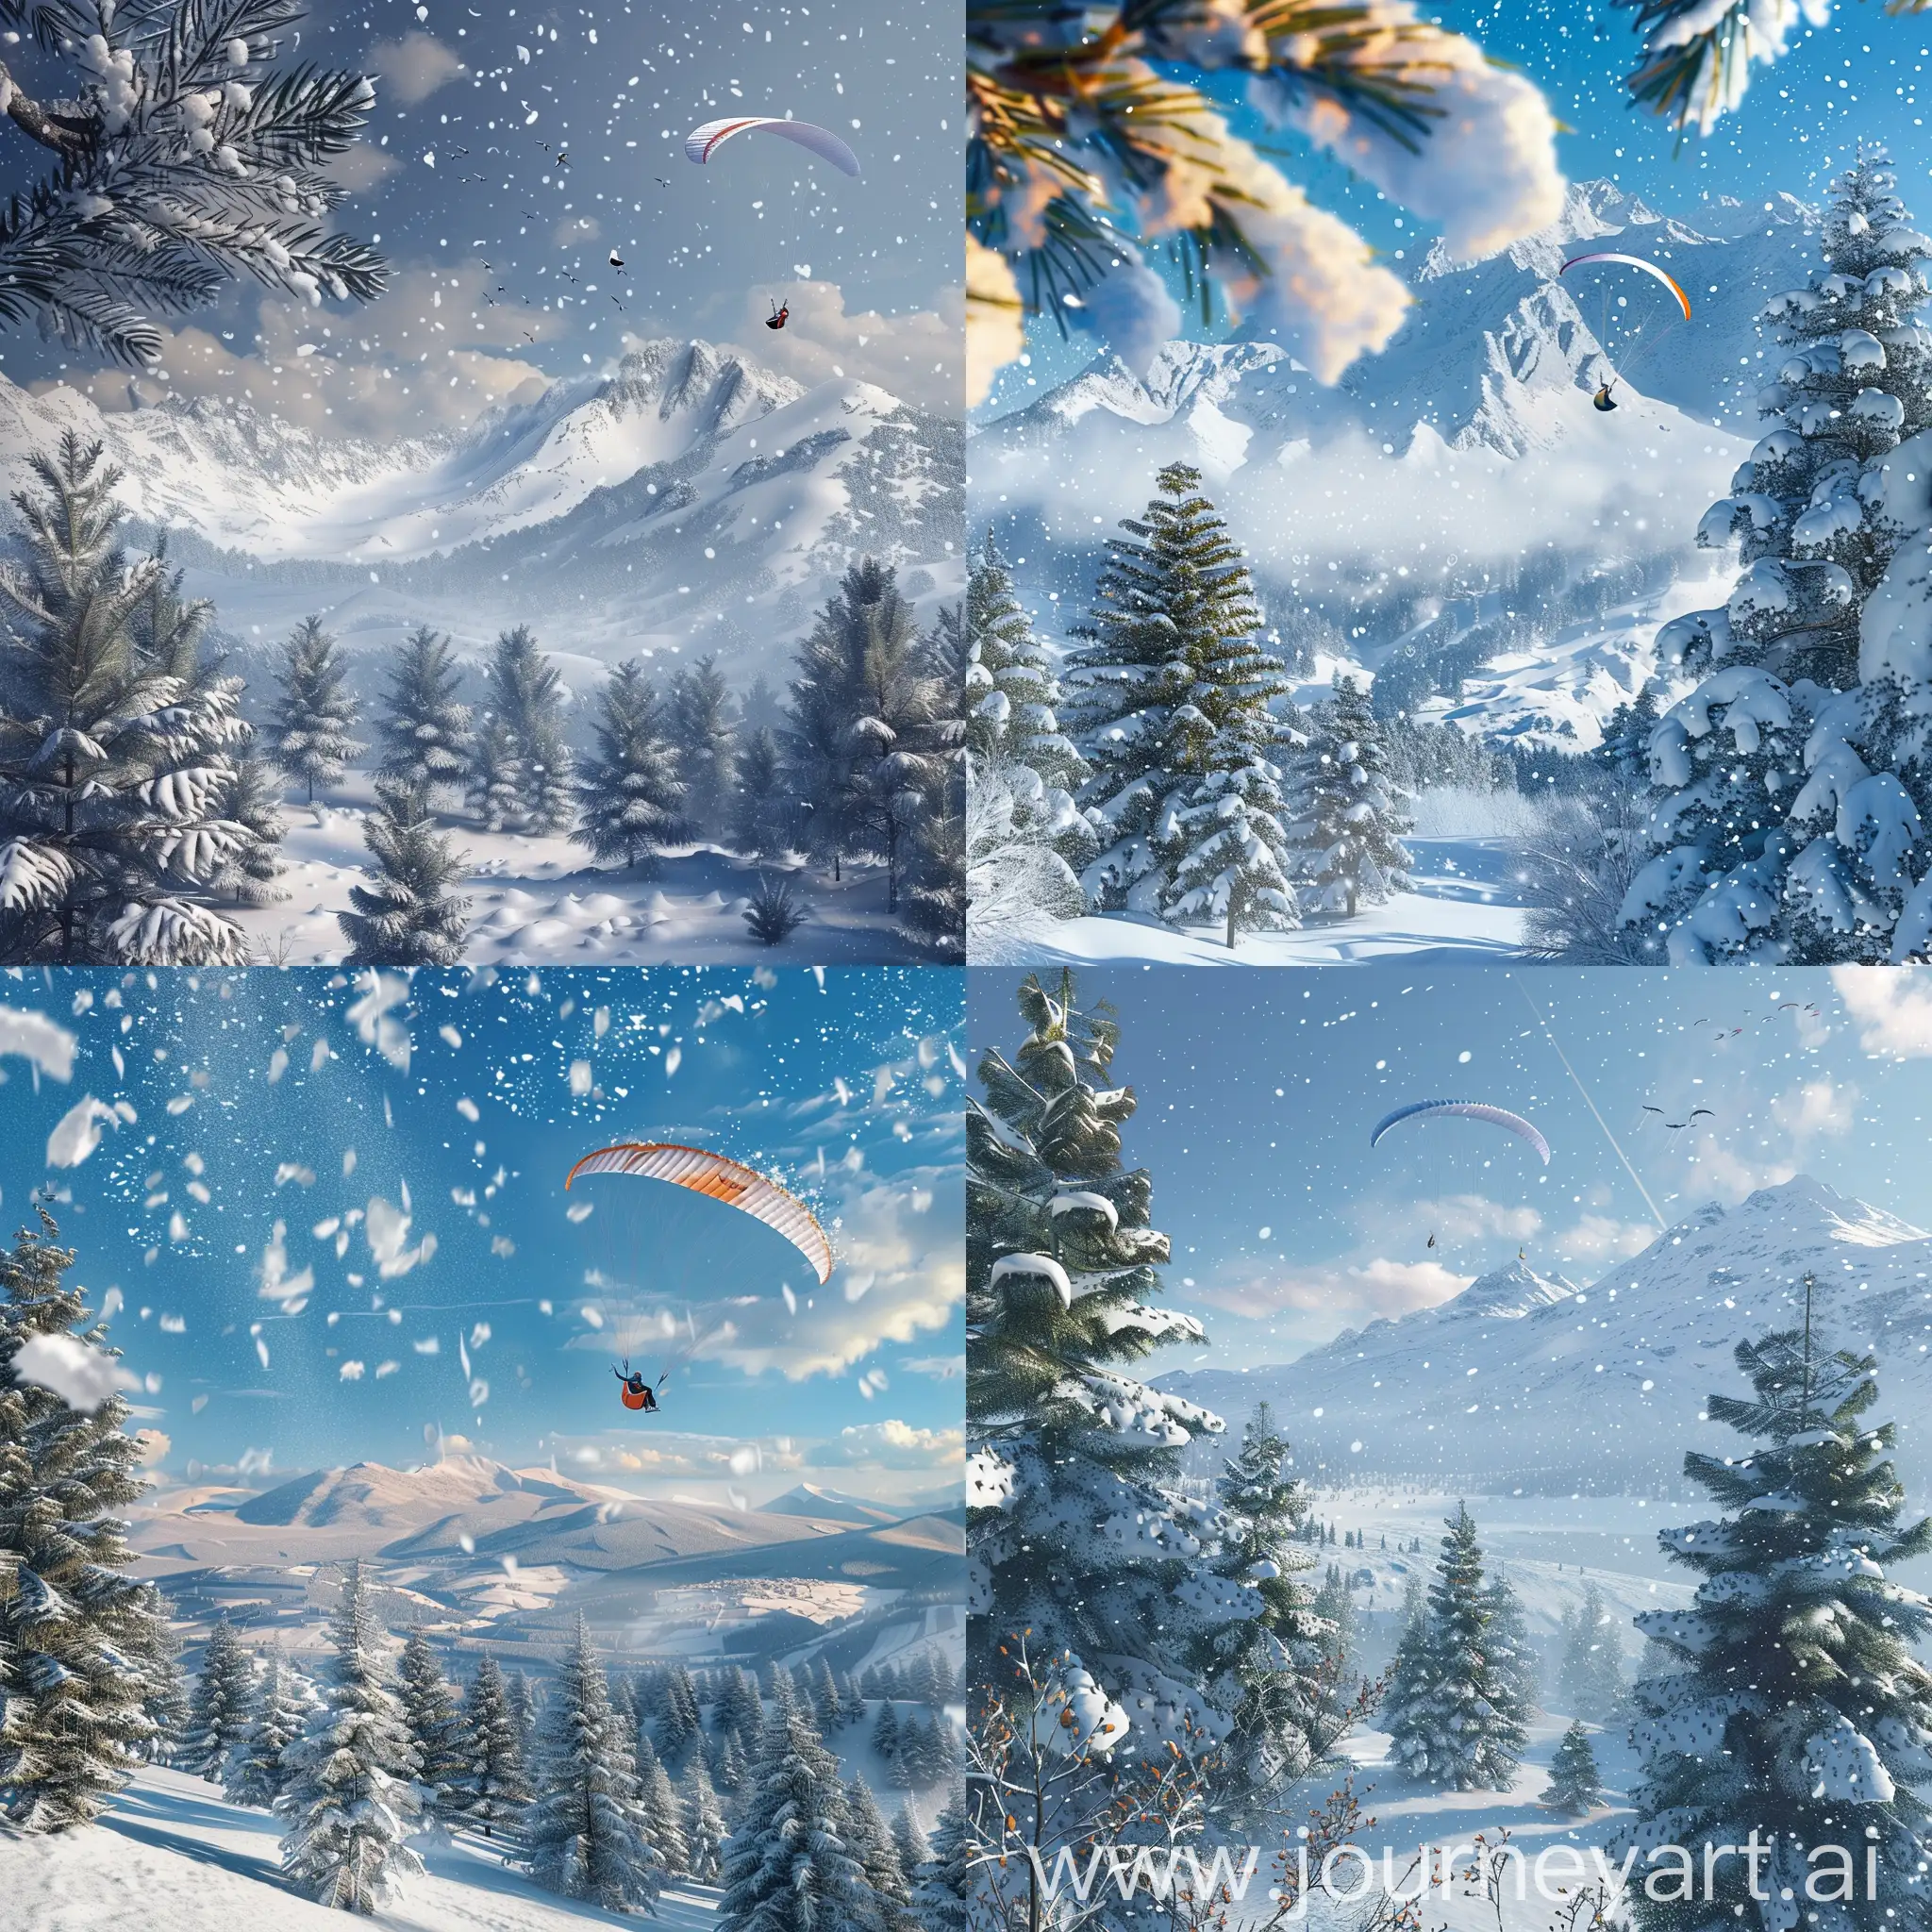 The snow falling from the mountain and the paraglider flying in the sky can be seen nearby, all the ground is covered with snow and ice, fir trees are decorated with snow.